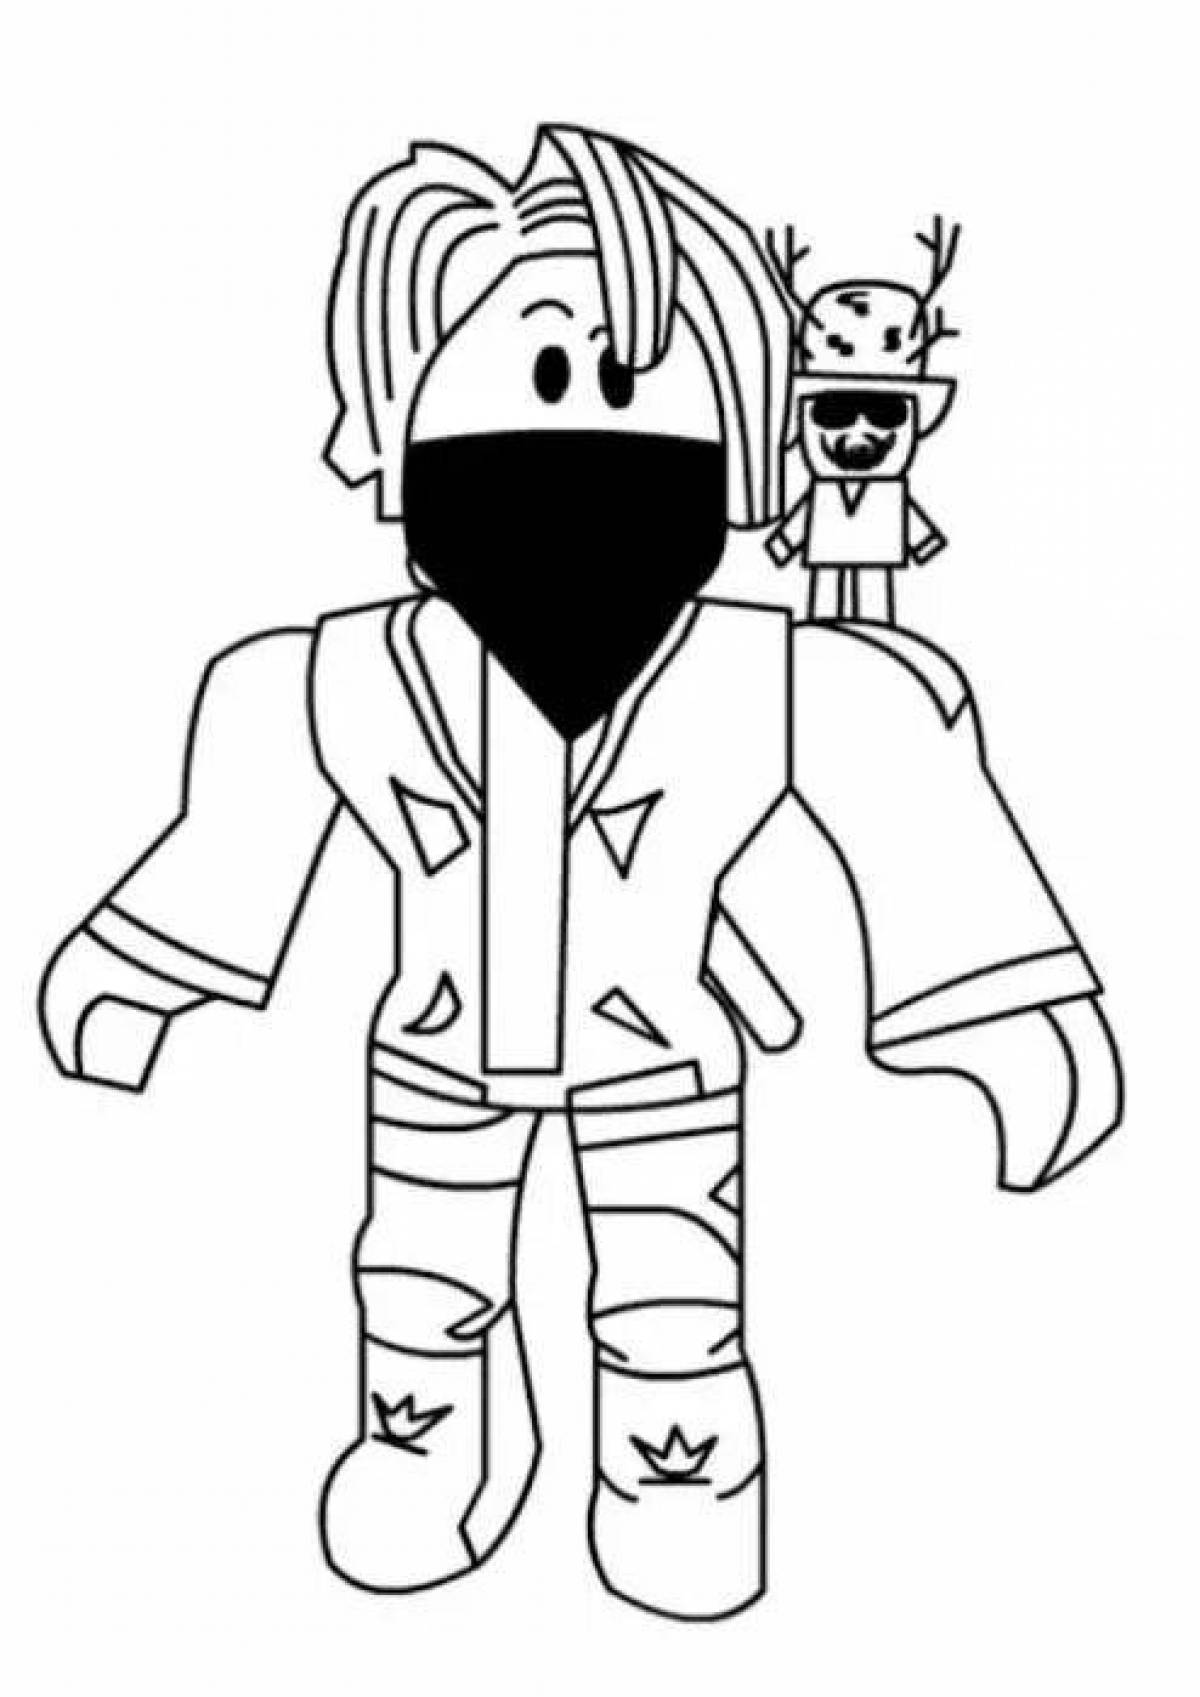 Detailed roblox face coloring page